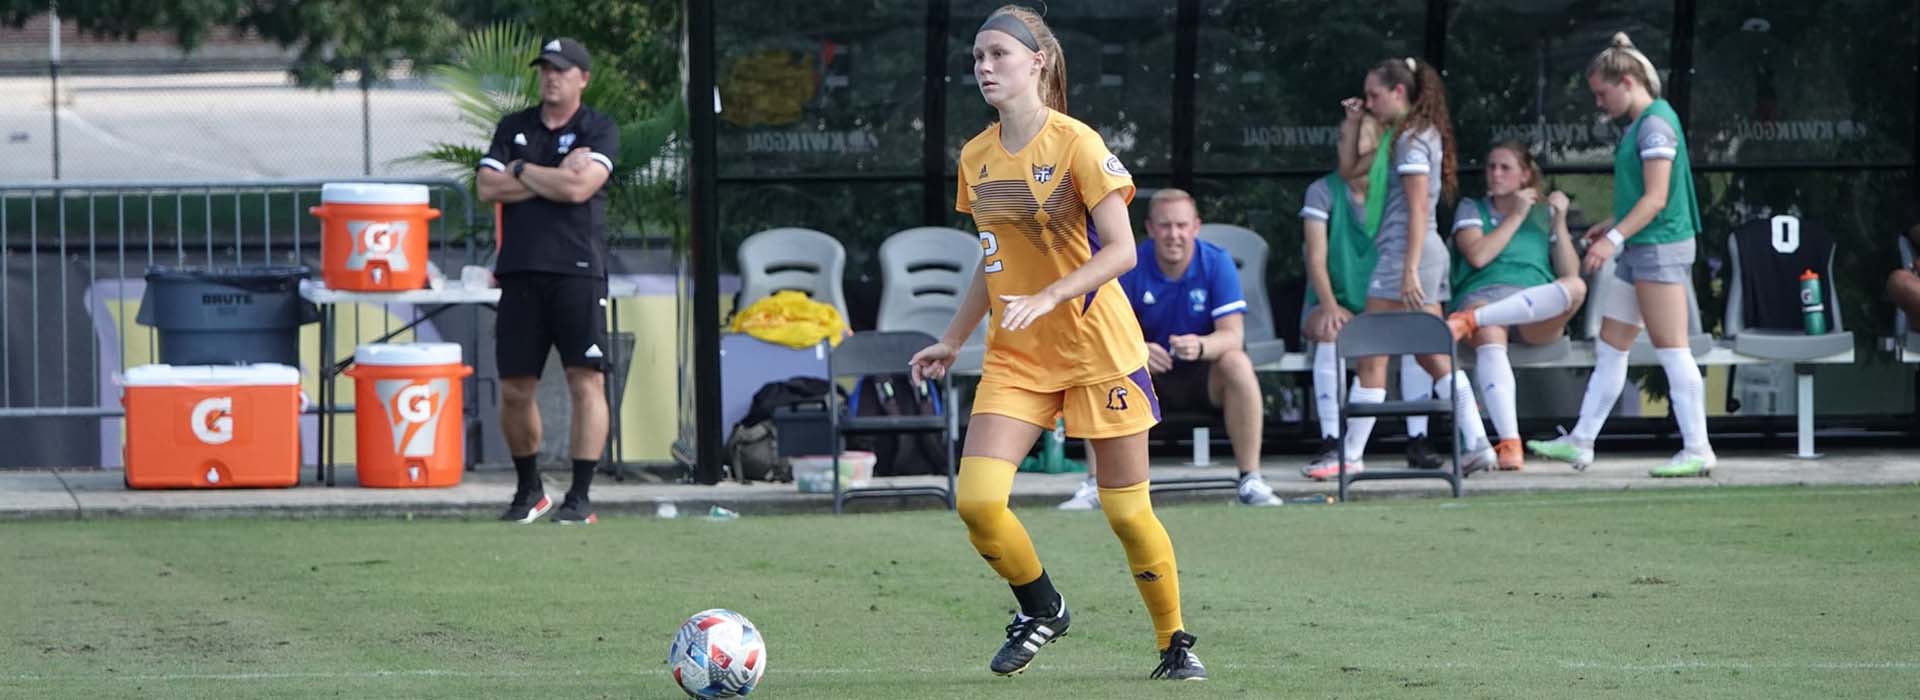 Golden Eagle soccer to host Belmont Tuesday night at Tech Soccer Field